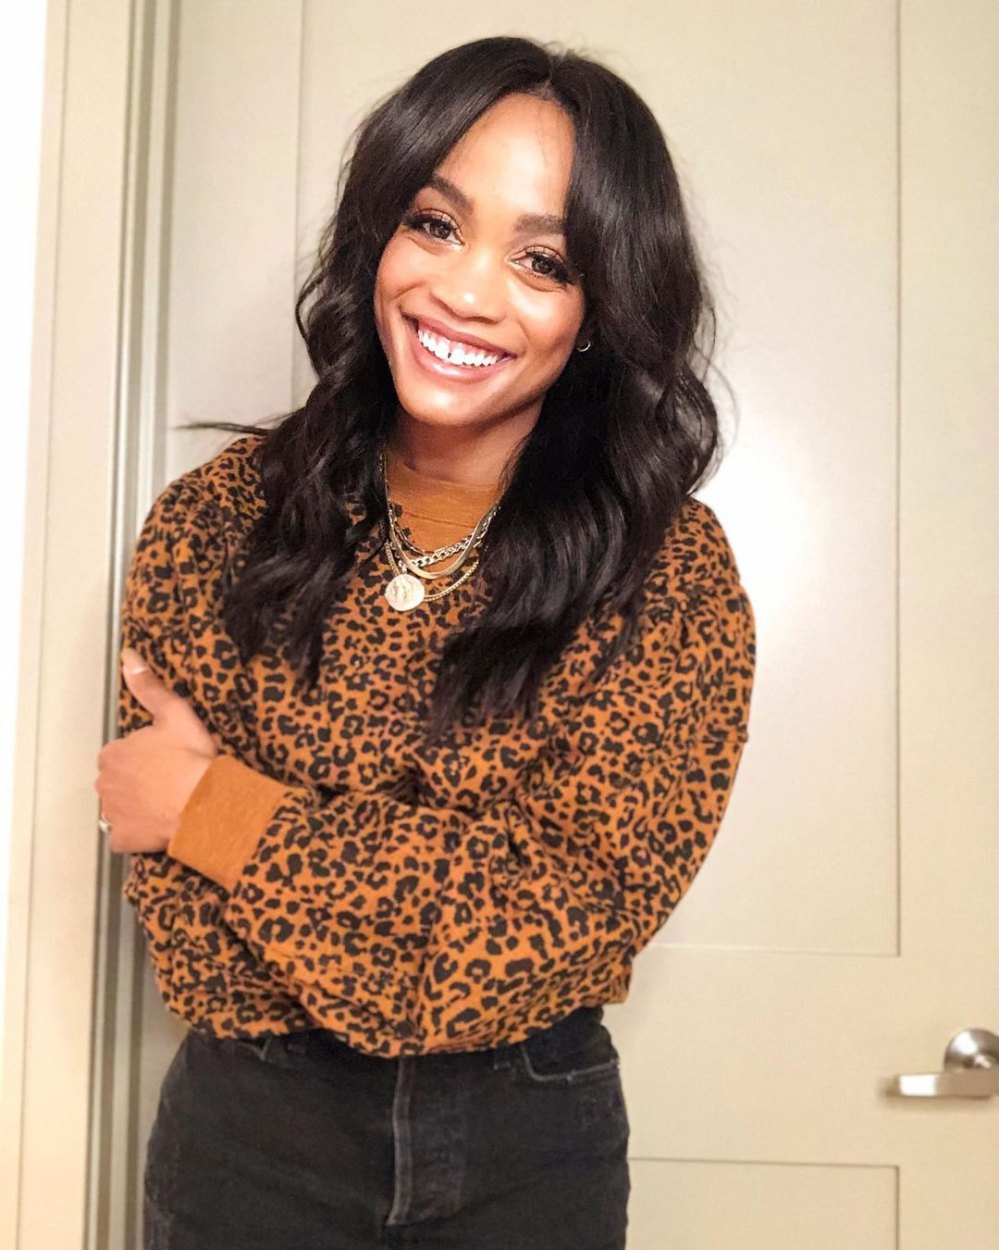 Rachel Lindsay Says Several People of Color in Casting Have Removed Themselves From Bachelorette After Controversy